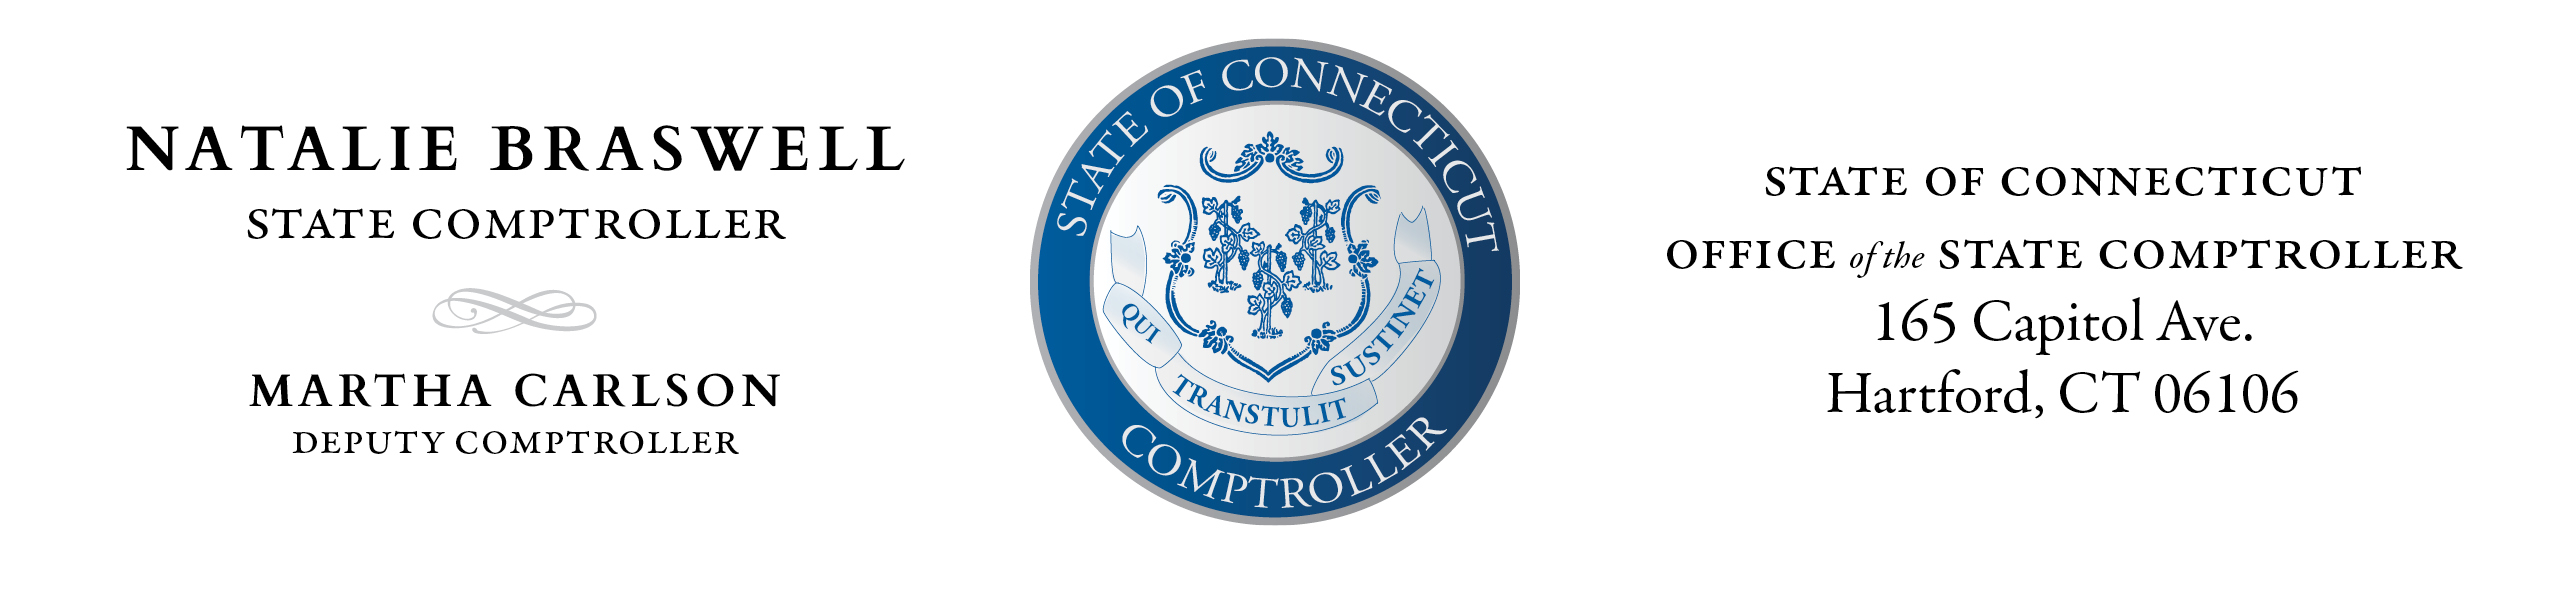 Office of the Comptroller letterhead